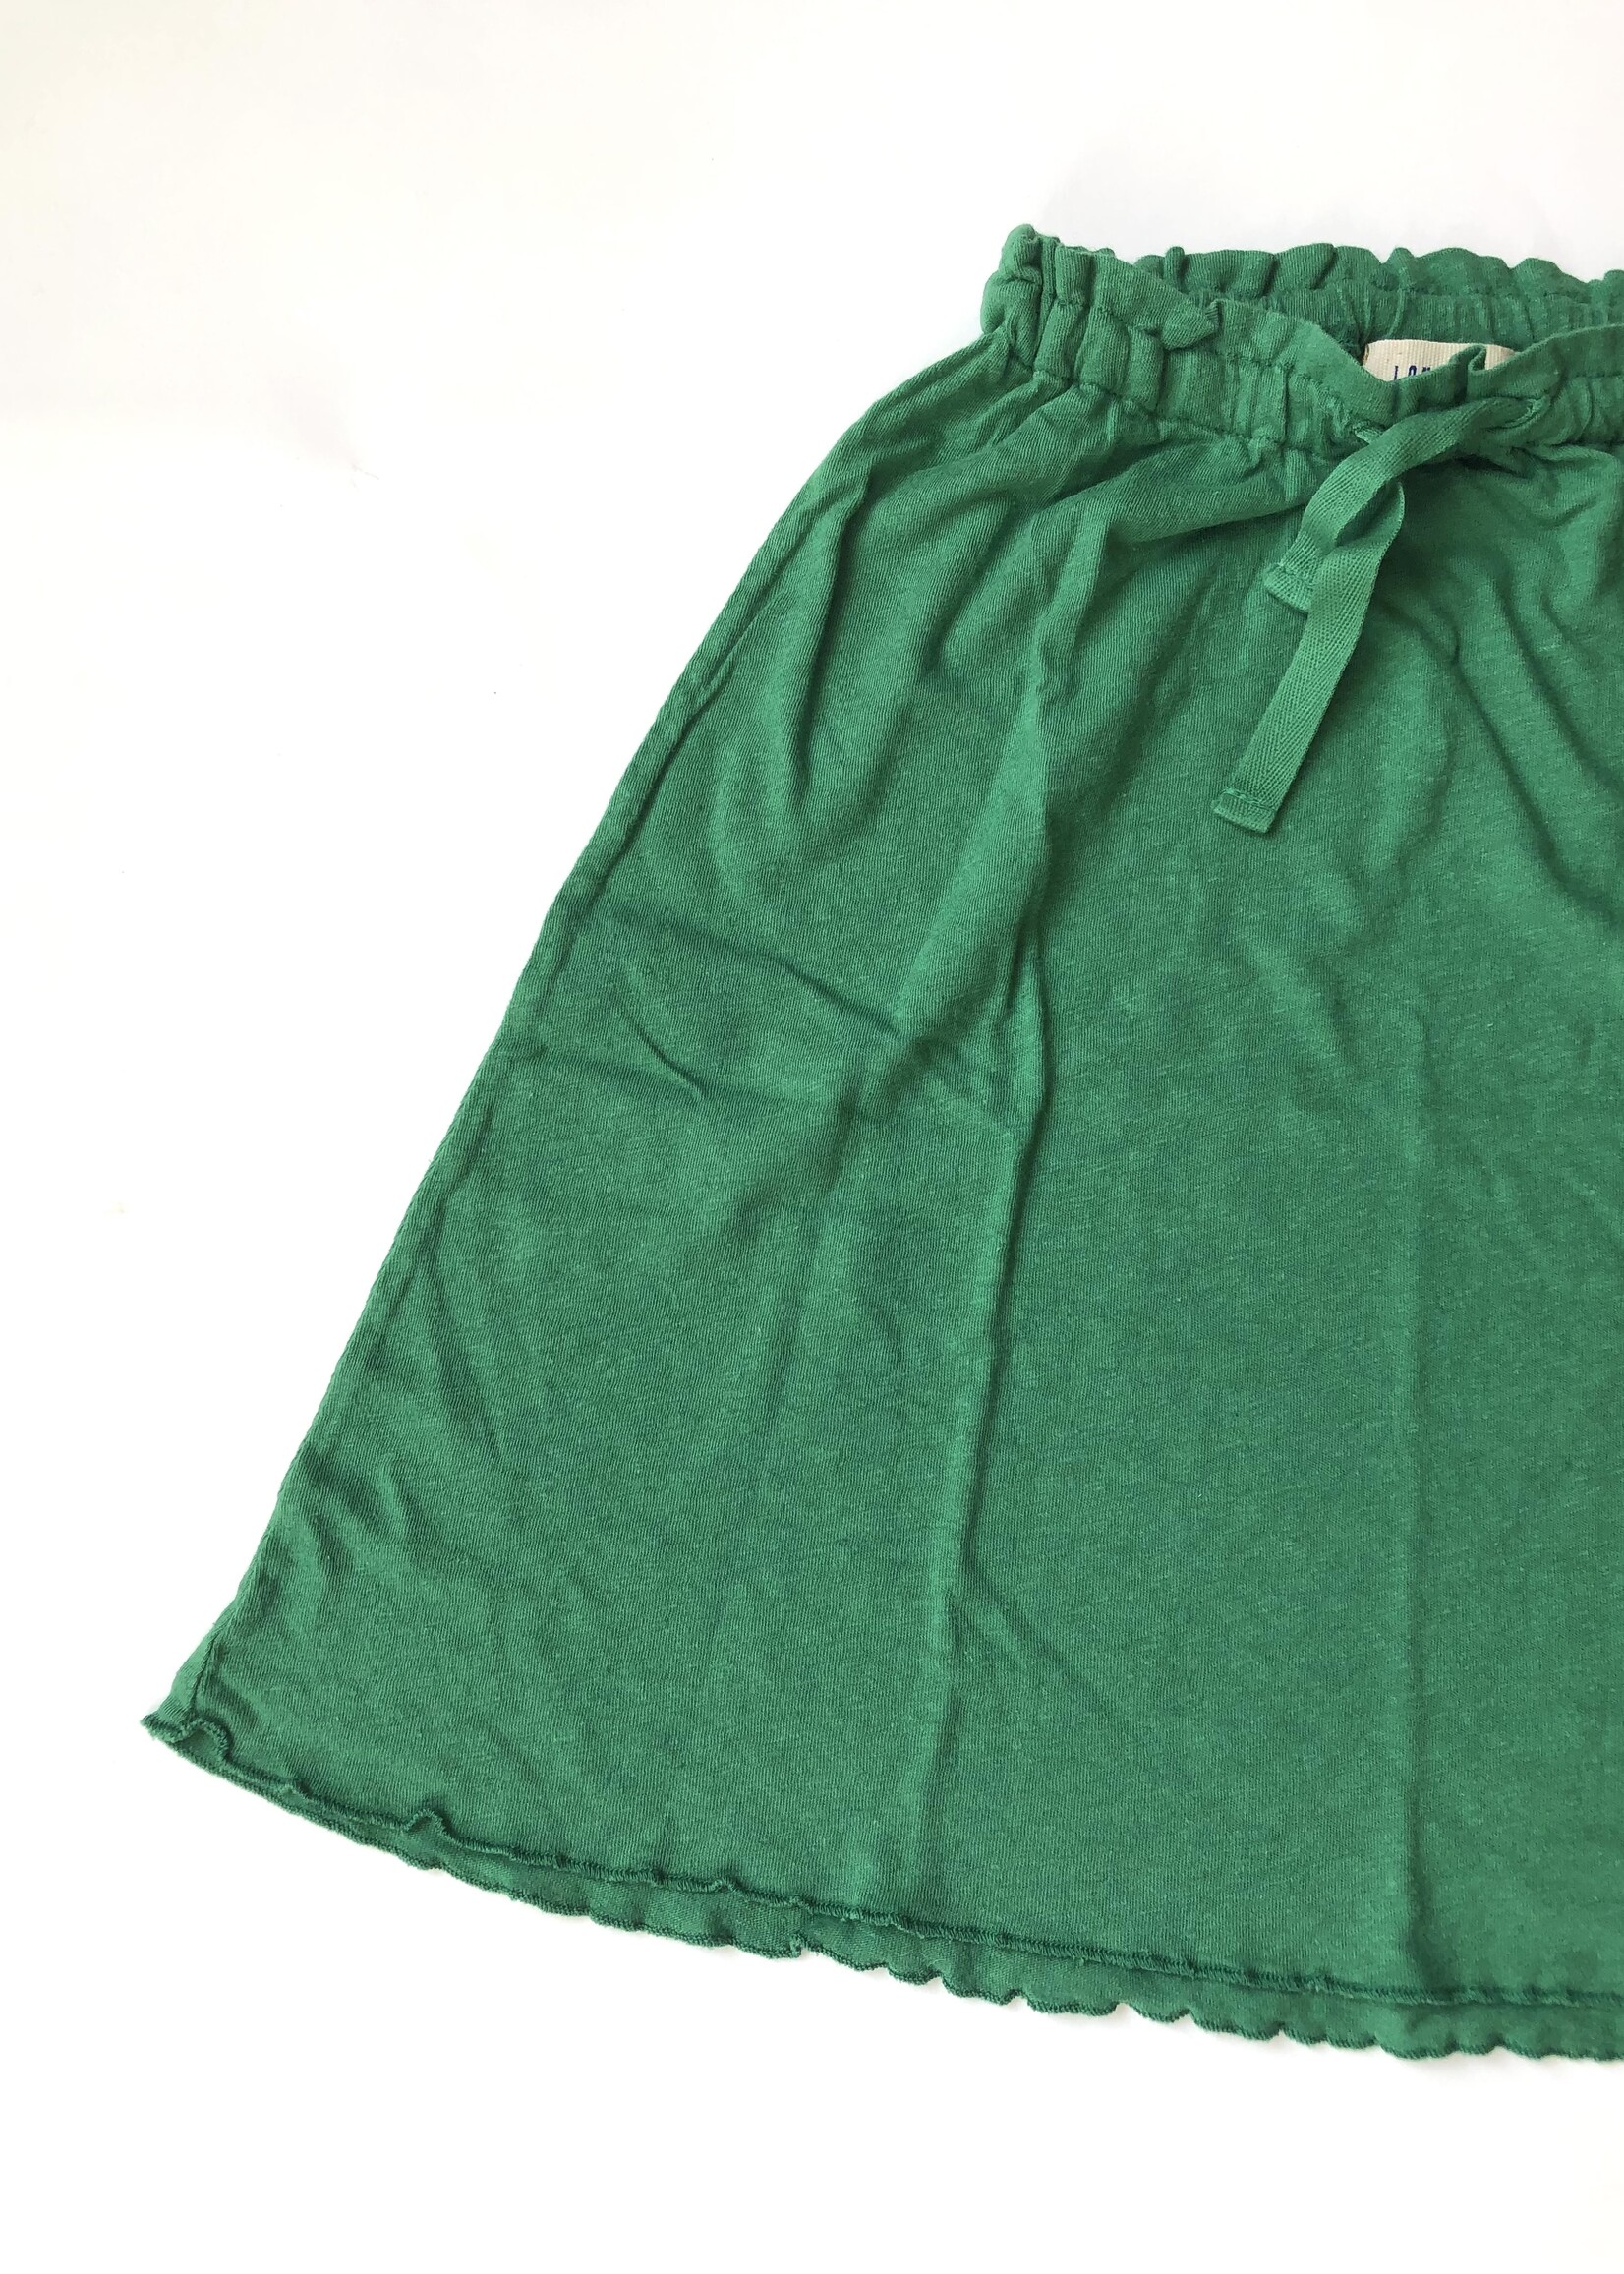 Long Live The Queen Green midi skirt 4y